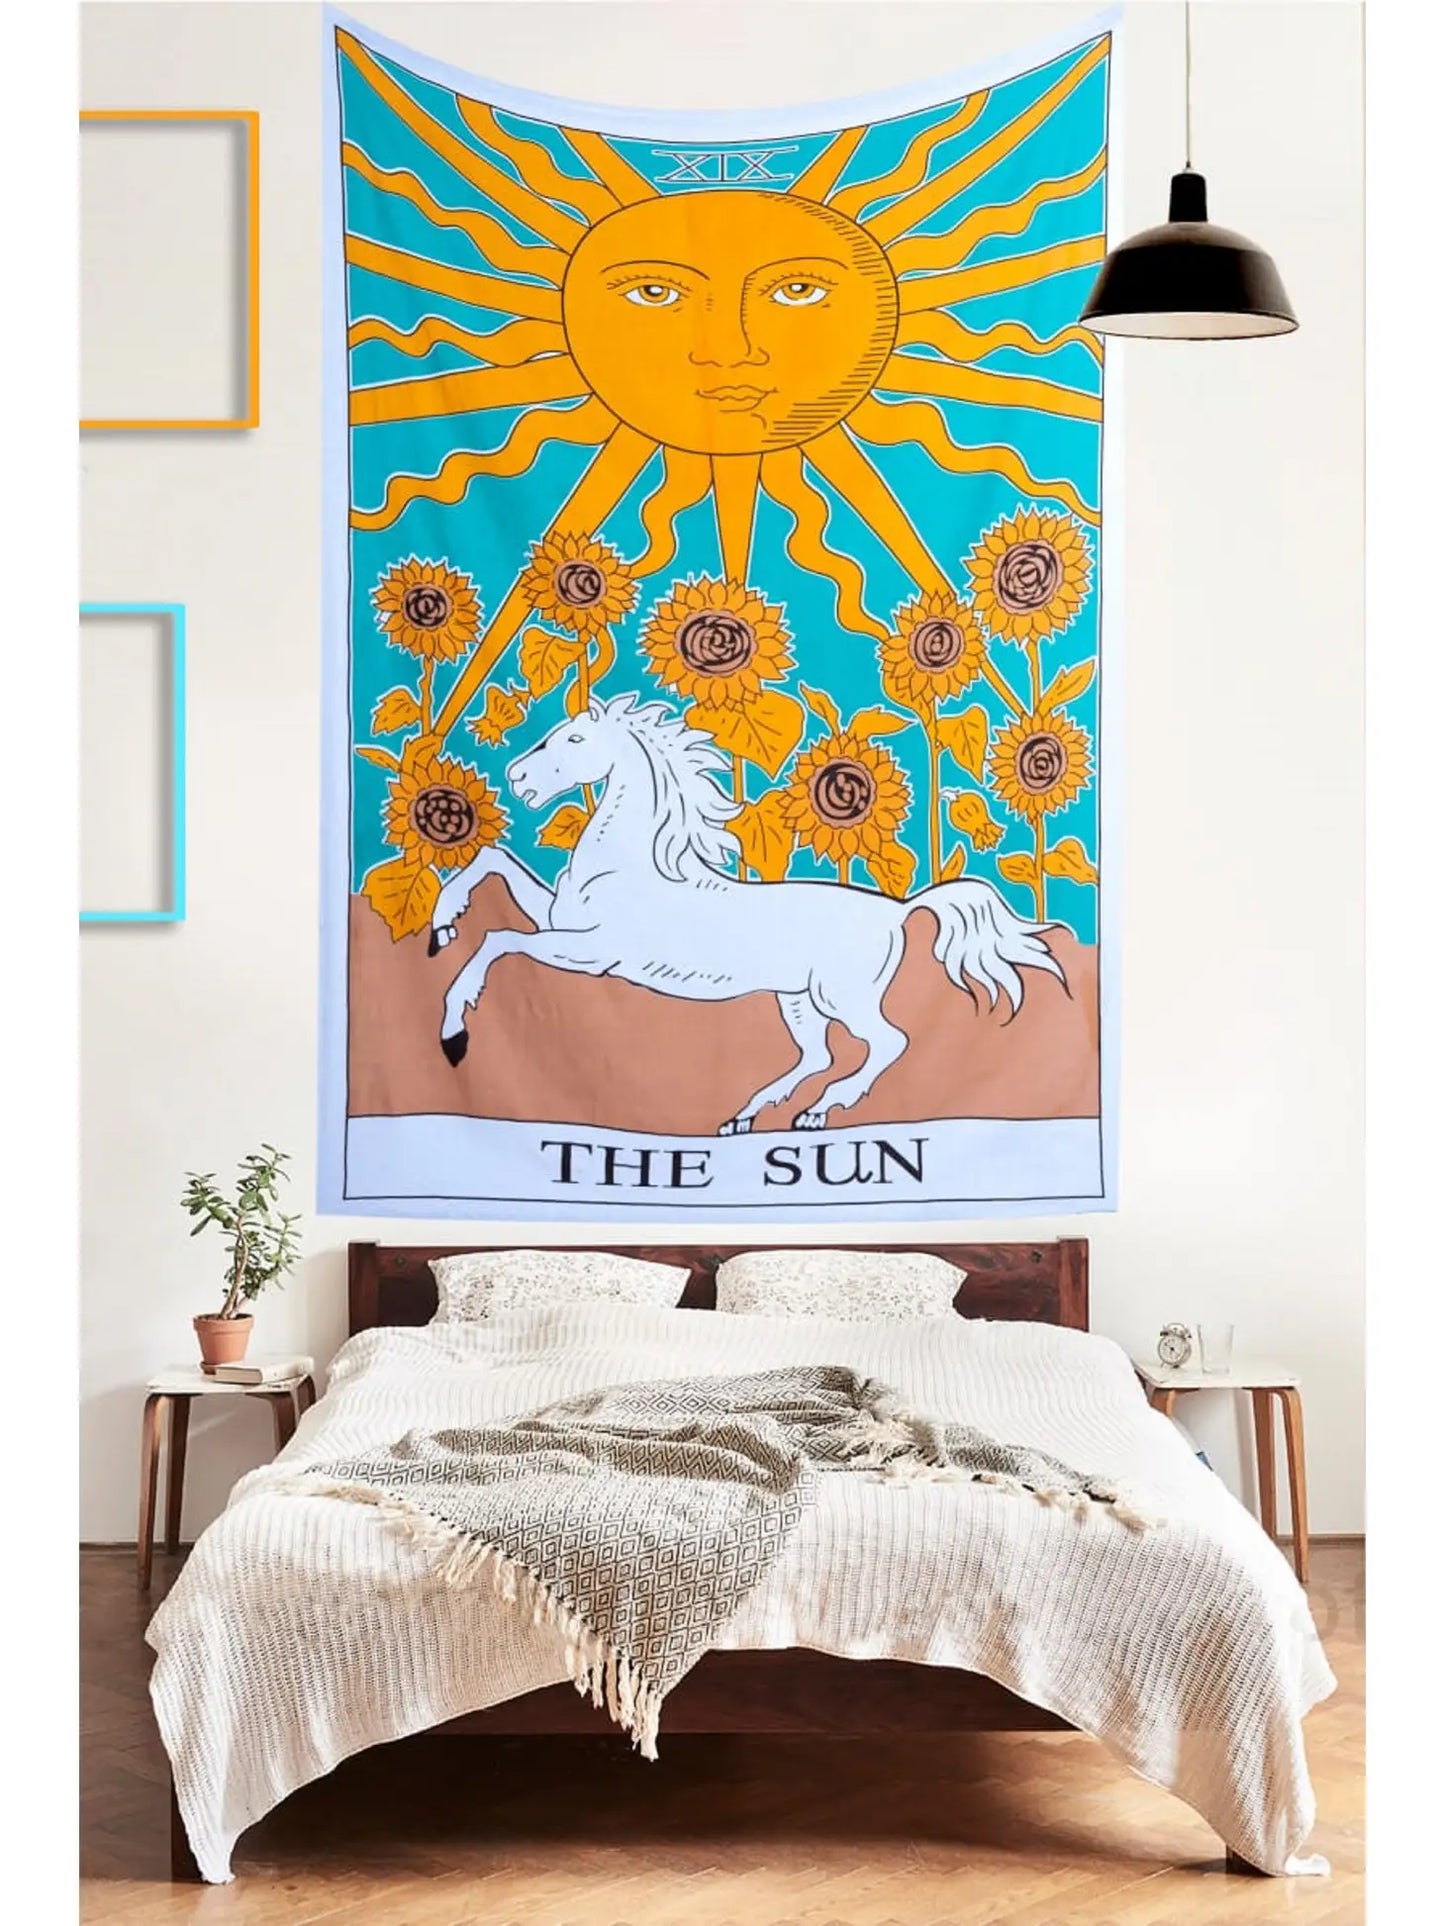 The Sun Horse Tapestry Wall Hanging Decor Medieval Europe